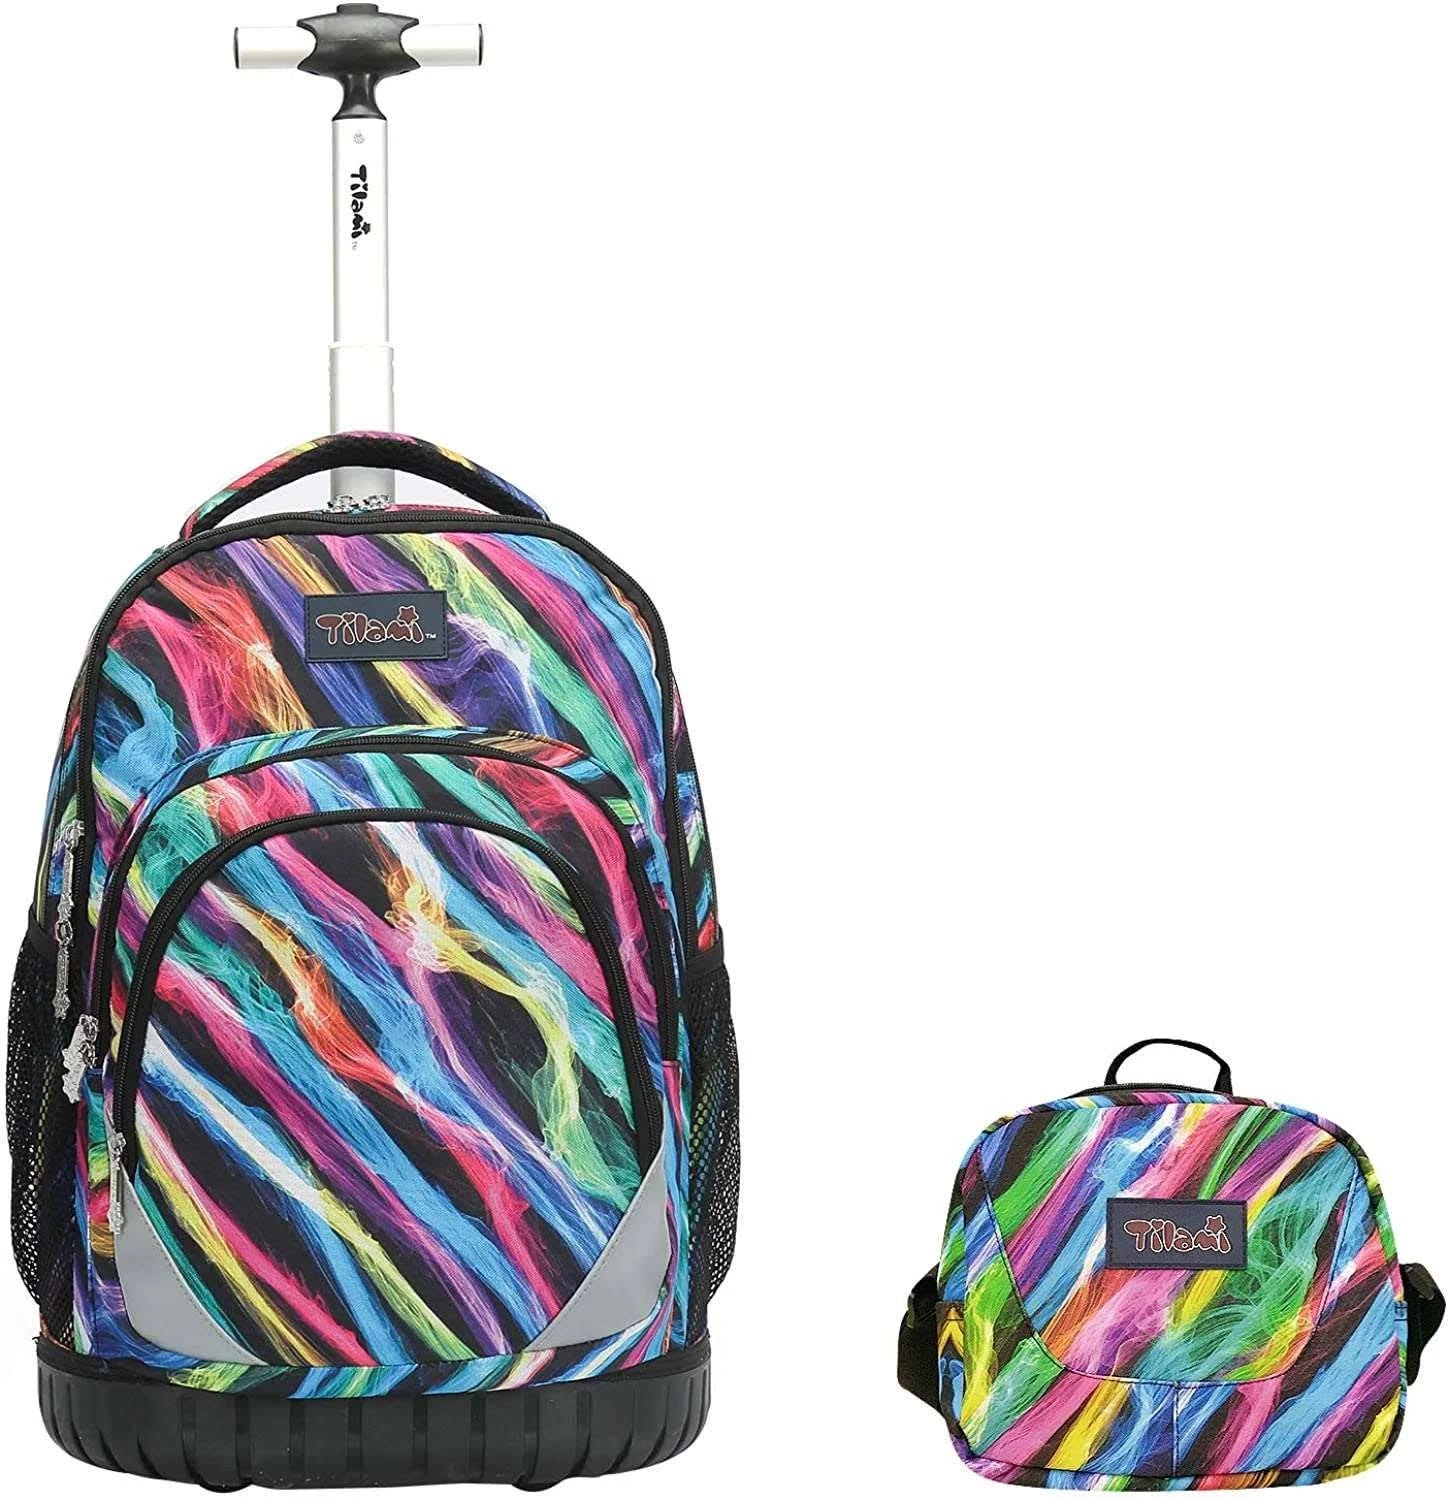 Tilami Colorful Rolling Backpack with Matching Lunch Bag | Image